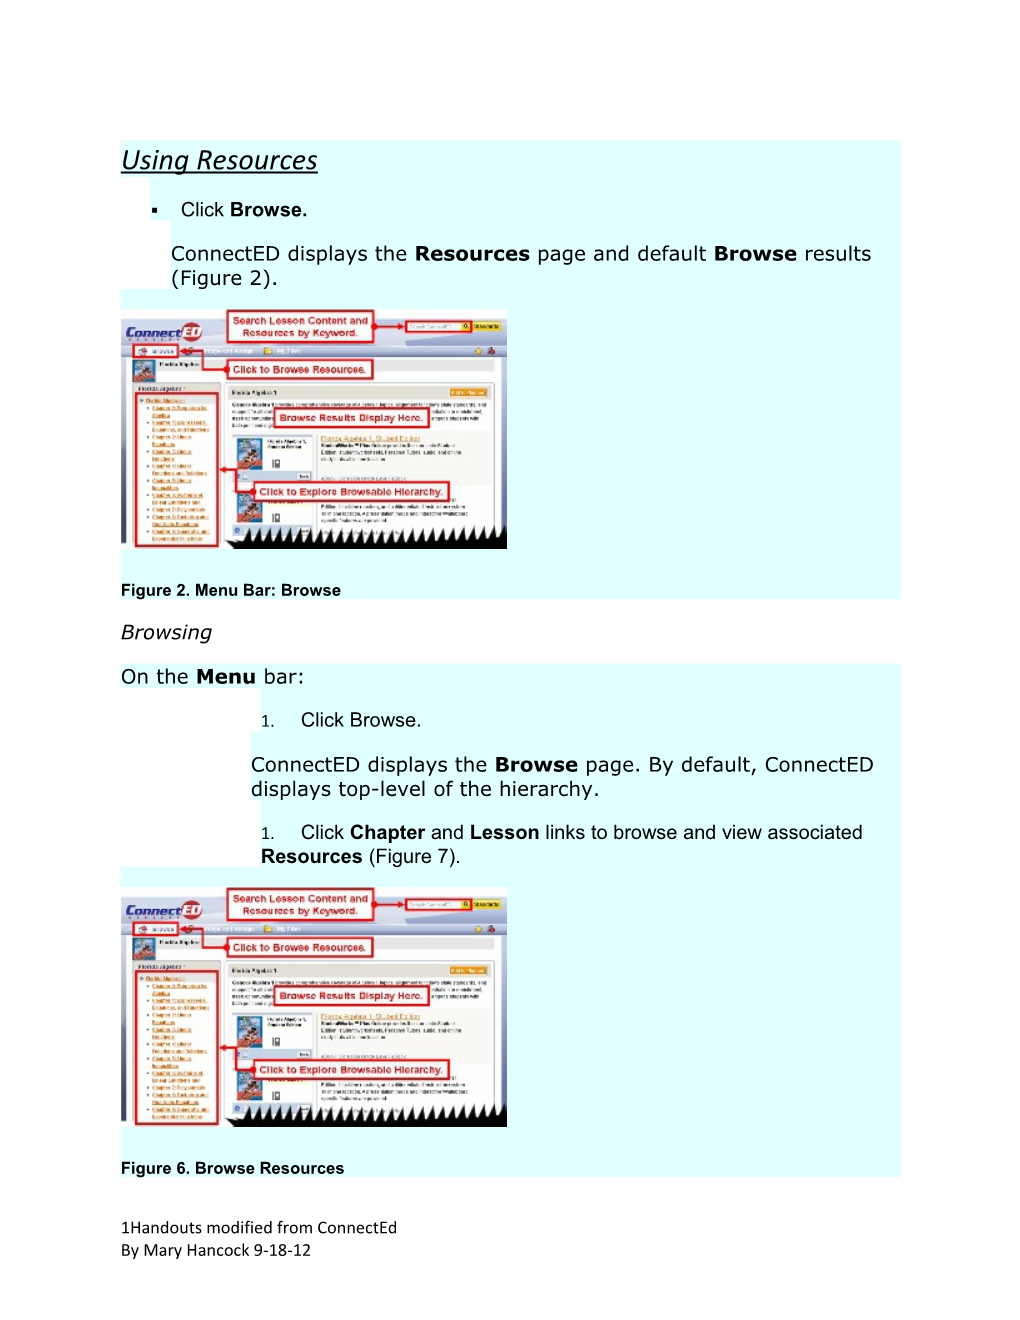 Connected Displays the Resources Page and Default Browse Results (Figure 2)